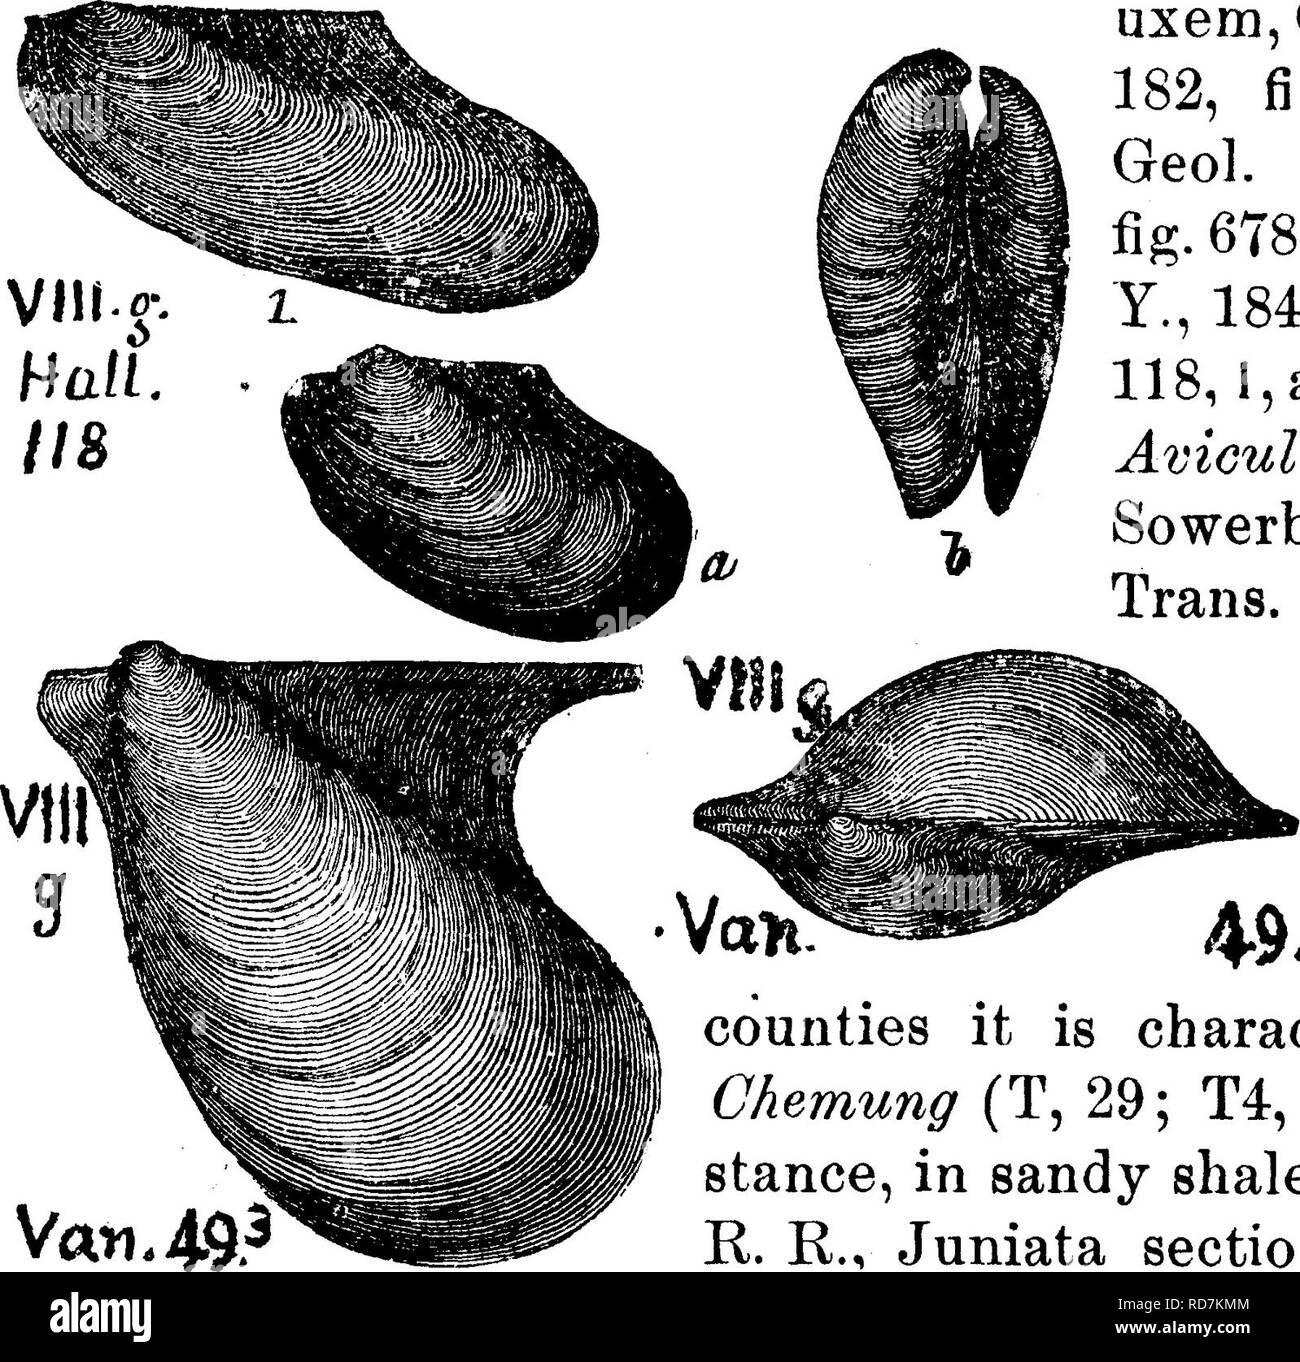 . A dictionary of the fossils of Pennsylvania and neighboring states named in the reports and catalogues of the survey ... Paleontology. Ptero. 816 Pteronites chemungensis. (Avicula chcmun^ensis.Yan- uxem, Geol. N. Y. page 182, fig. 49. Rogers Geo]. Pa., page 829. fig. 678. Hall Geol. N. Y., 1843, page 263, fig. 118, l,a, b. (Compare Avicula damno7iensis Sowerby. in Geolog. Trans. London 12] LIII, fig. 22.) Chemung for- mation,— In Huntingdon and Centre. 49.' counties it is characteristic of the Chemung (T, 29; T4, 434), as, for in- stance, in sandy shales No. 44,45, Fa. R. R., Juniata section Stock Photo